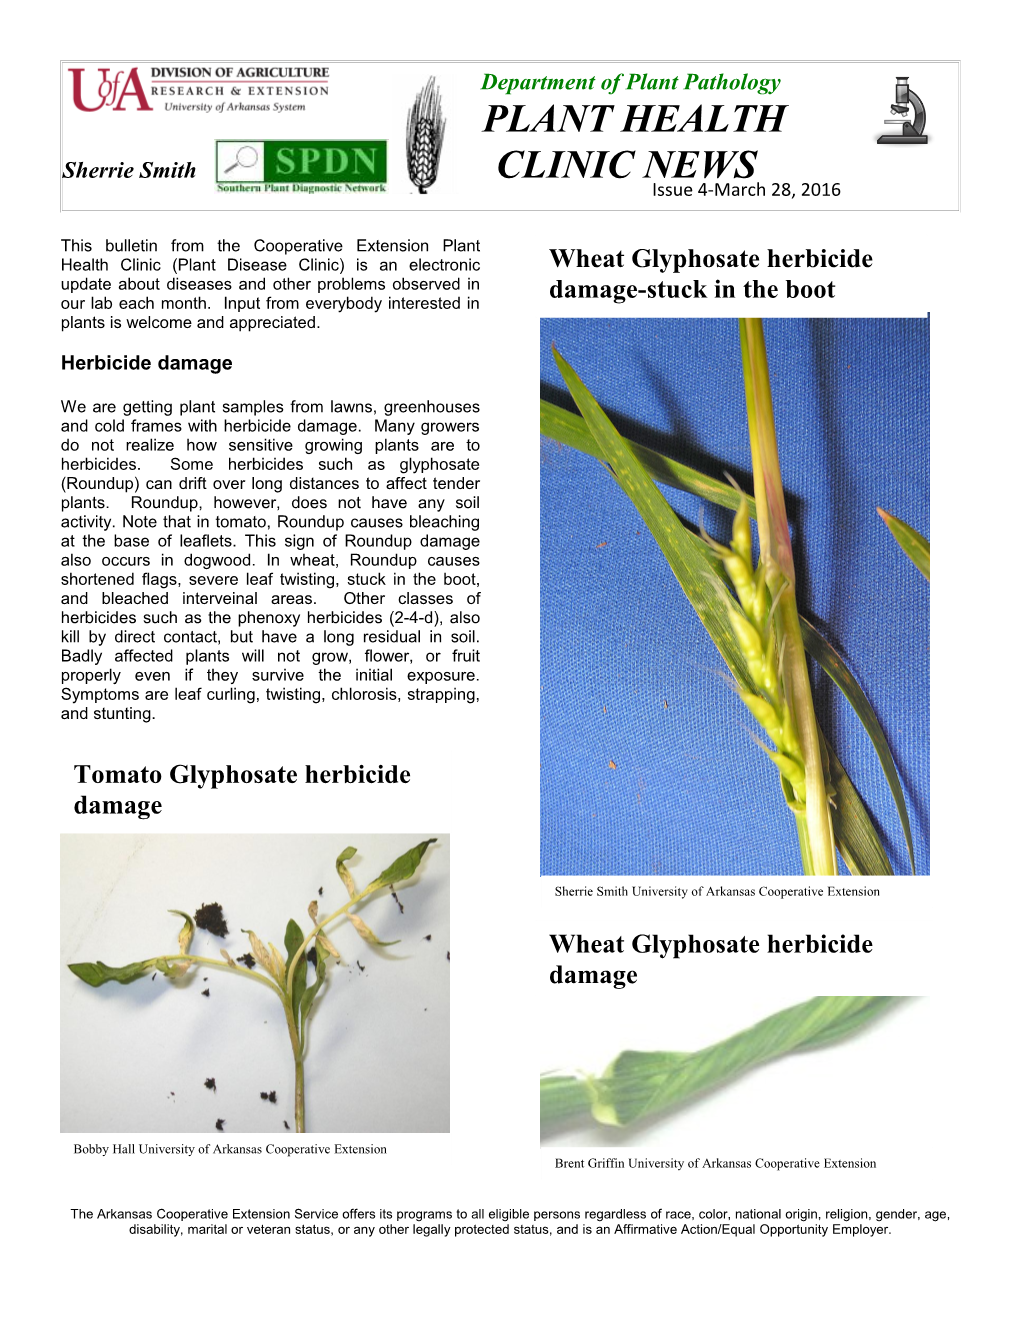 This Is the First Bulletin from the Cooperative Extension Plant Health Clinic (Plant Disease